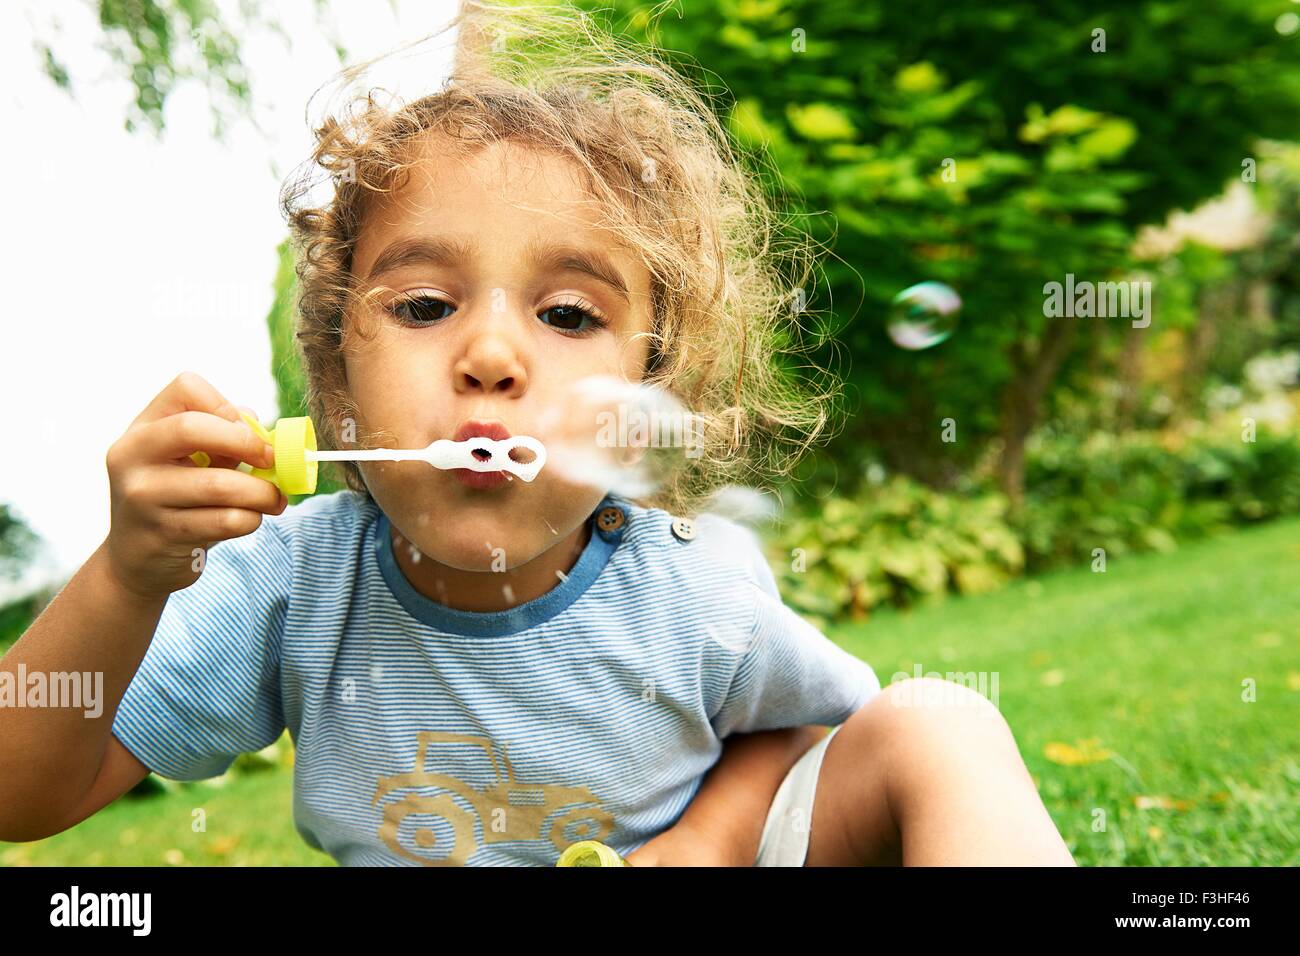 Close up portrait of cute girl blowing bubbles in garden Banque D'Images